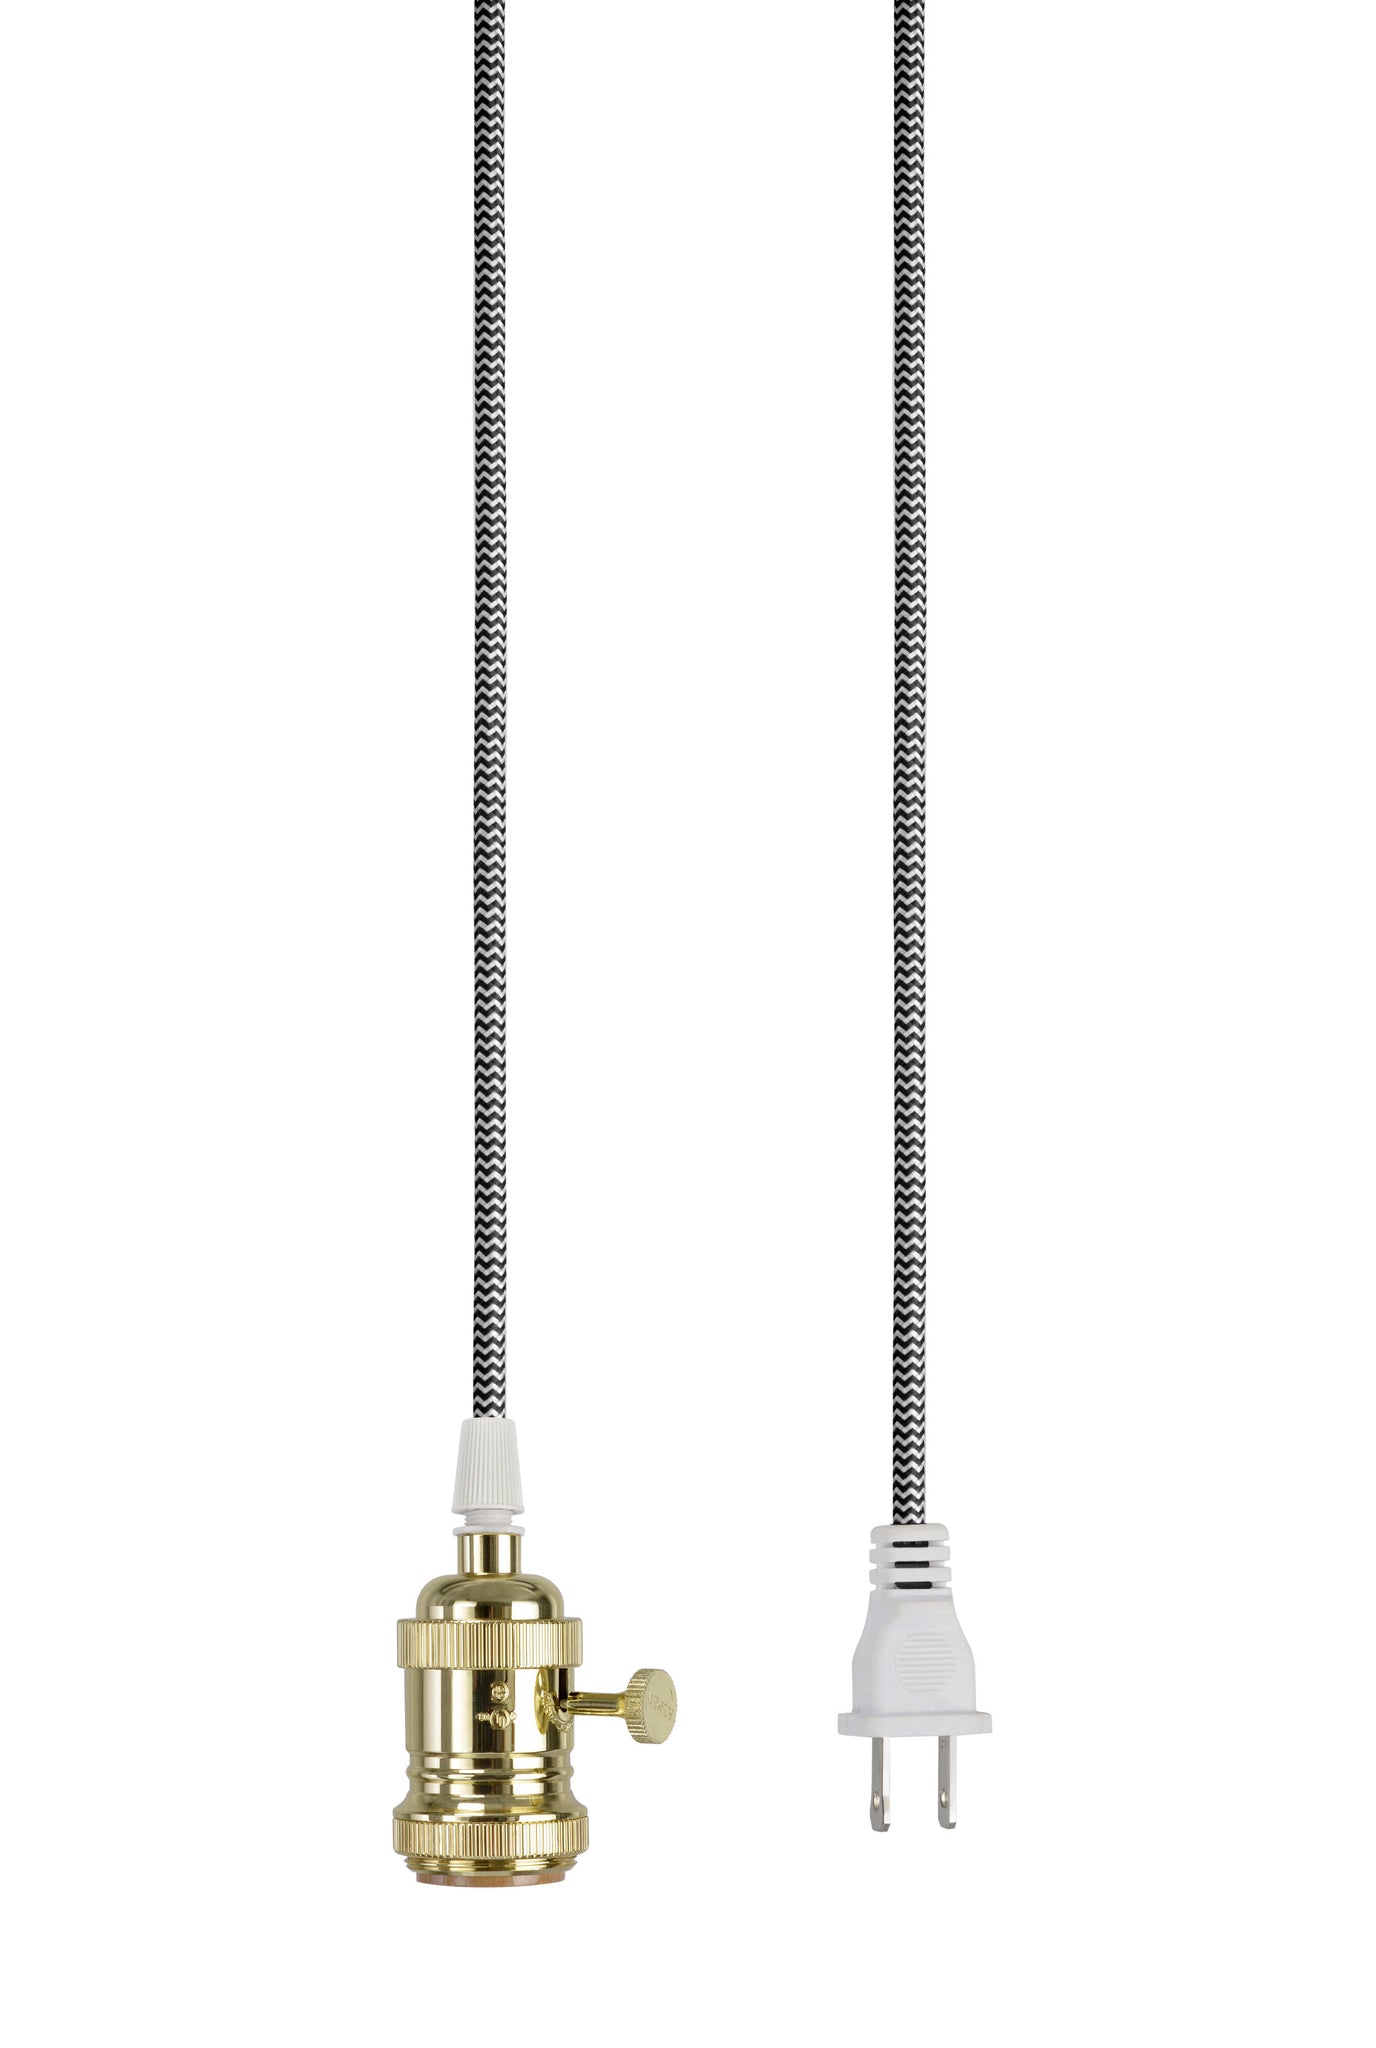 Aspen Creative 21106-31,Steel 10 Feet Heavy Duty Chain for Hanging Up Maximum Weight 50 Pounds-Lighting Fixture/Swag Light/Plant in Brushed Nickel.9